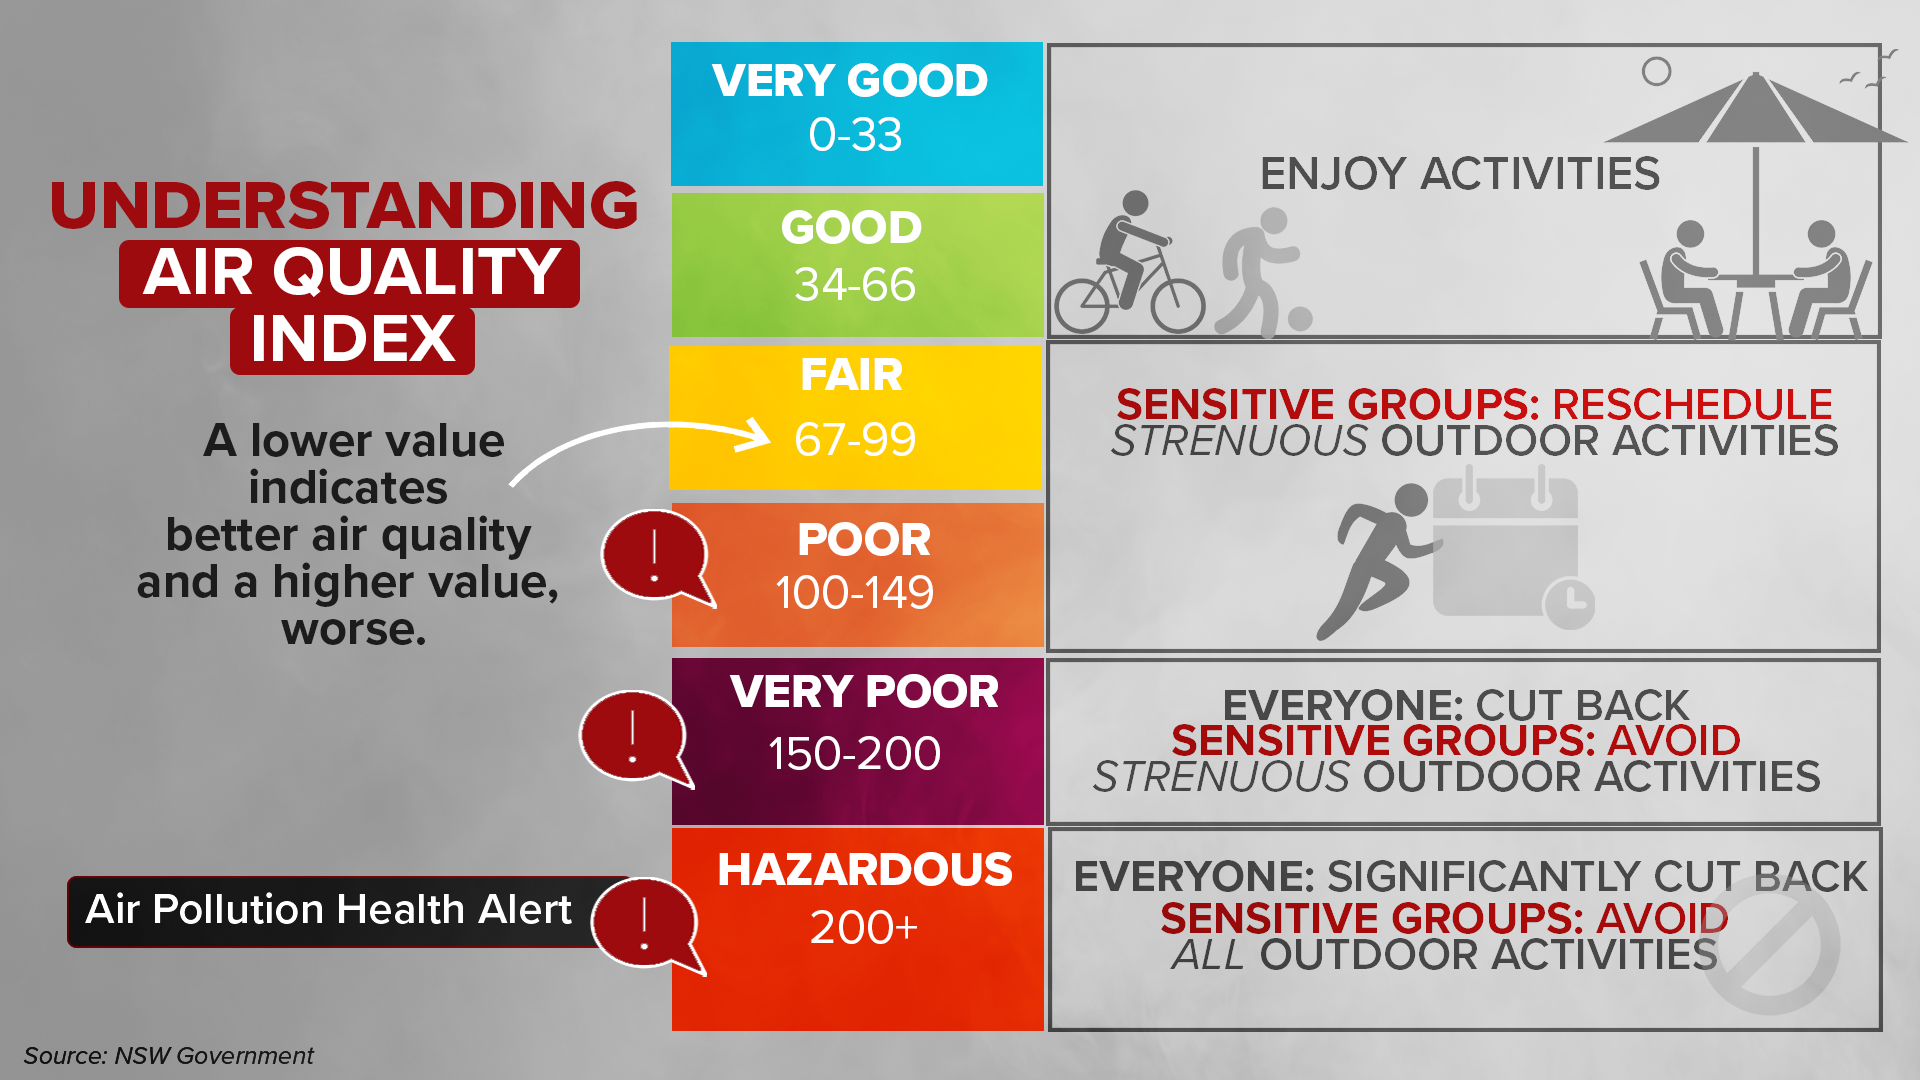 The air quality index provides a guide to safe activities based on conditions.